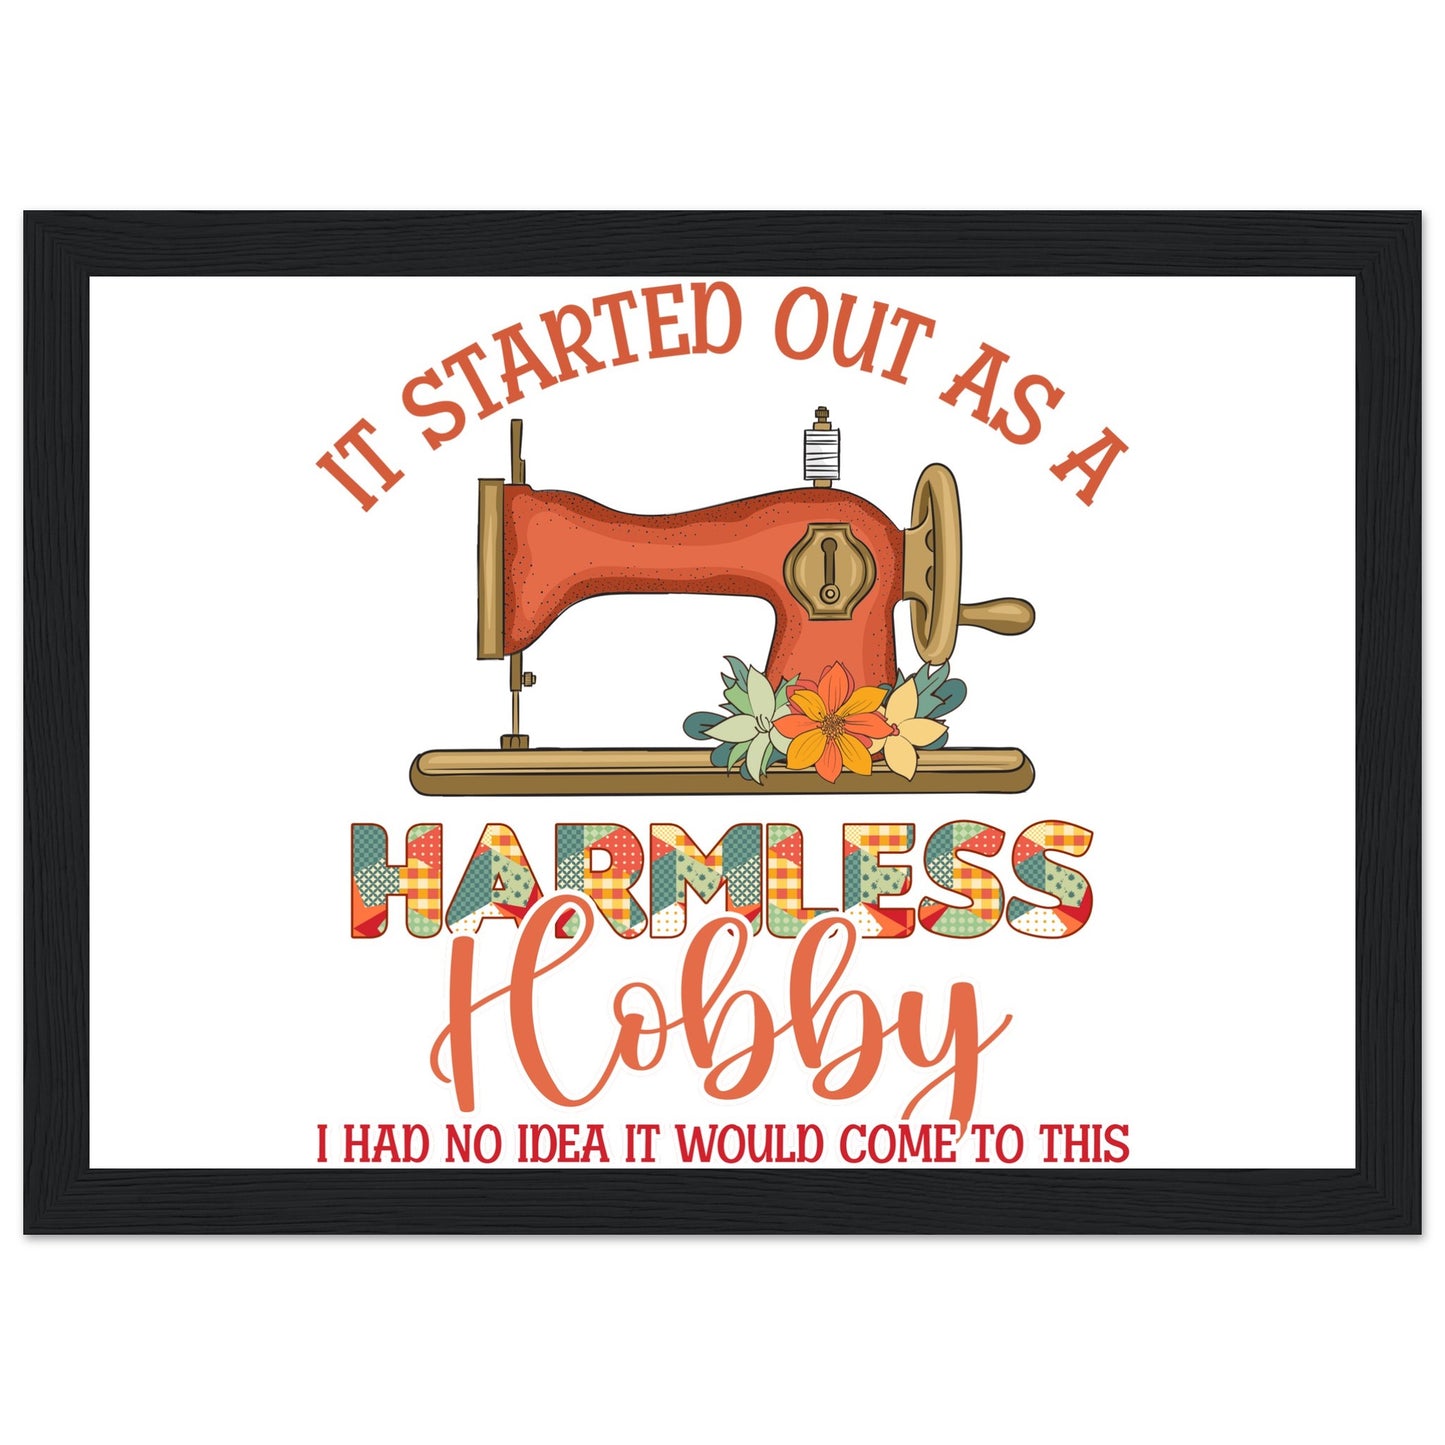 It Started Out as a Harmless Hobby I Had No Idea It Would Come to This - Quilting Wall Art - Premium Matte Paper Wooden Framed Poster